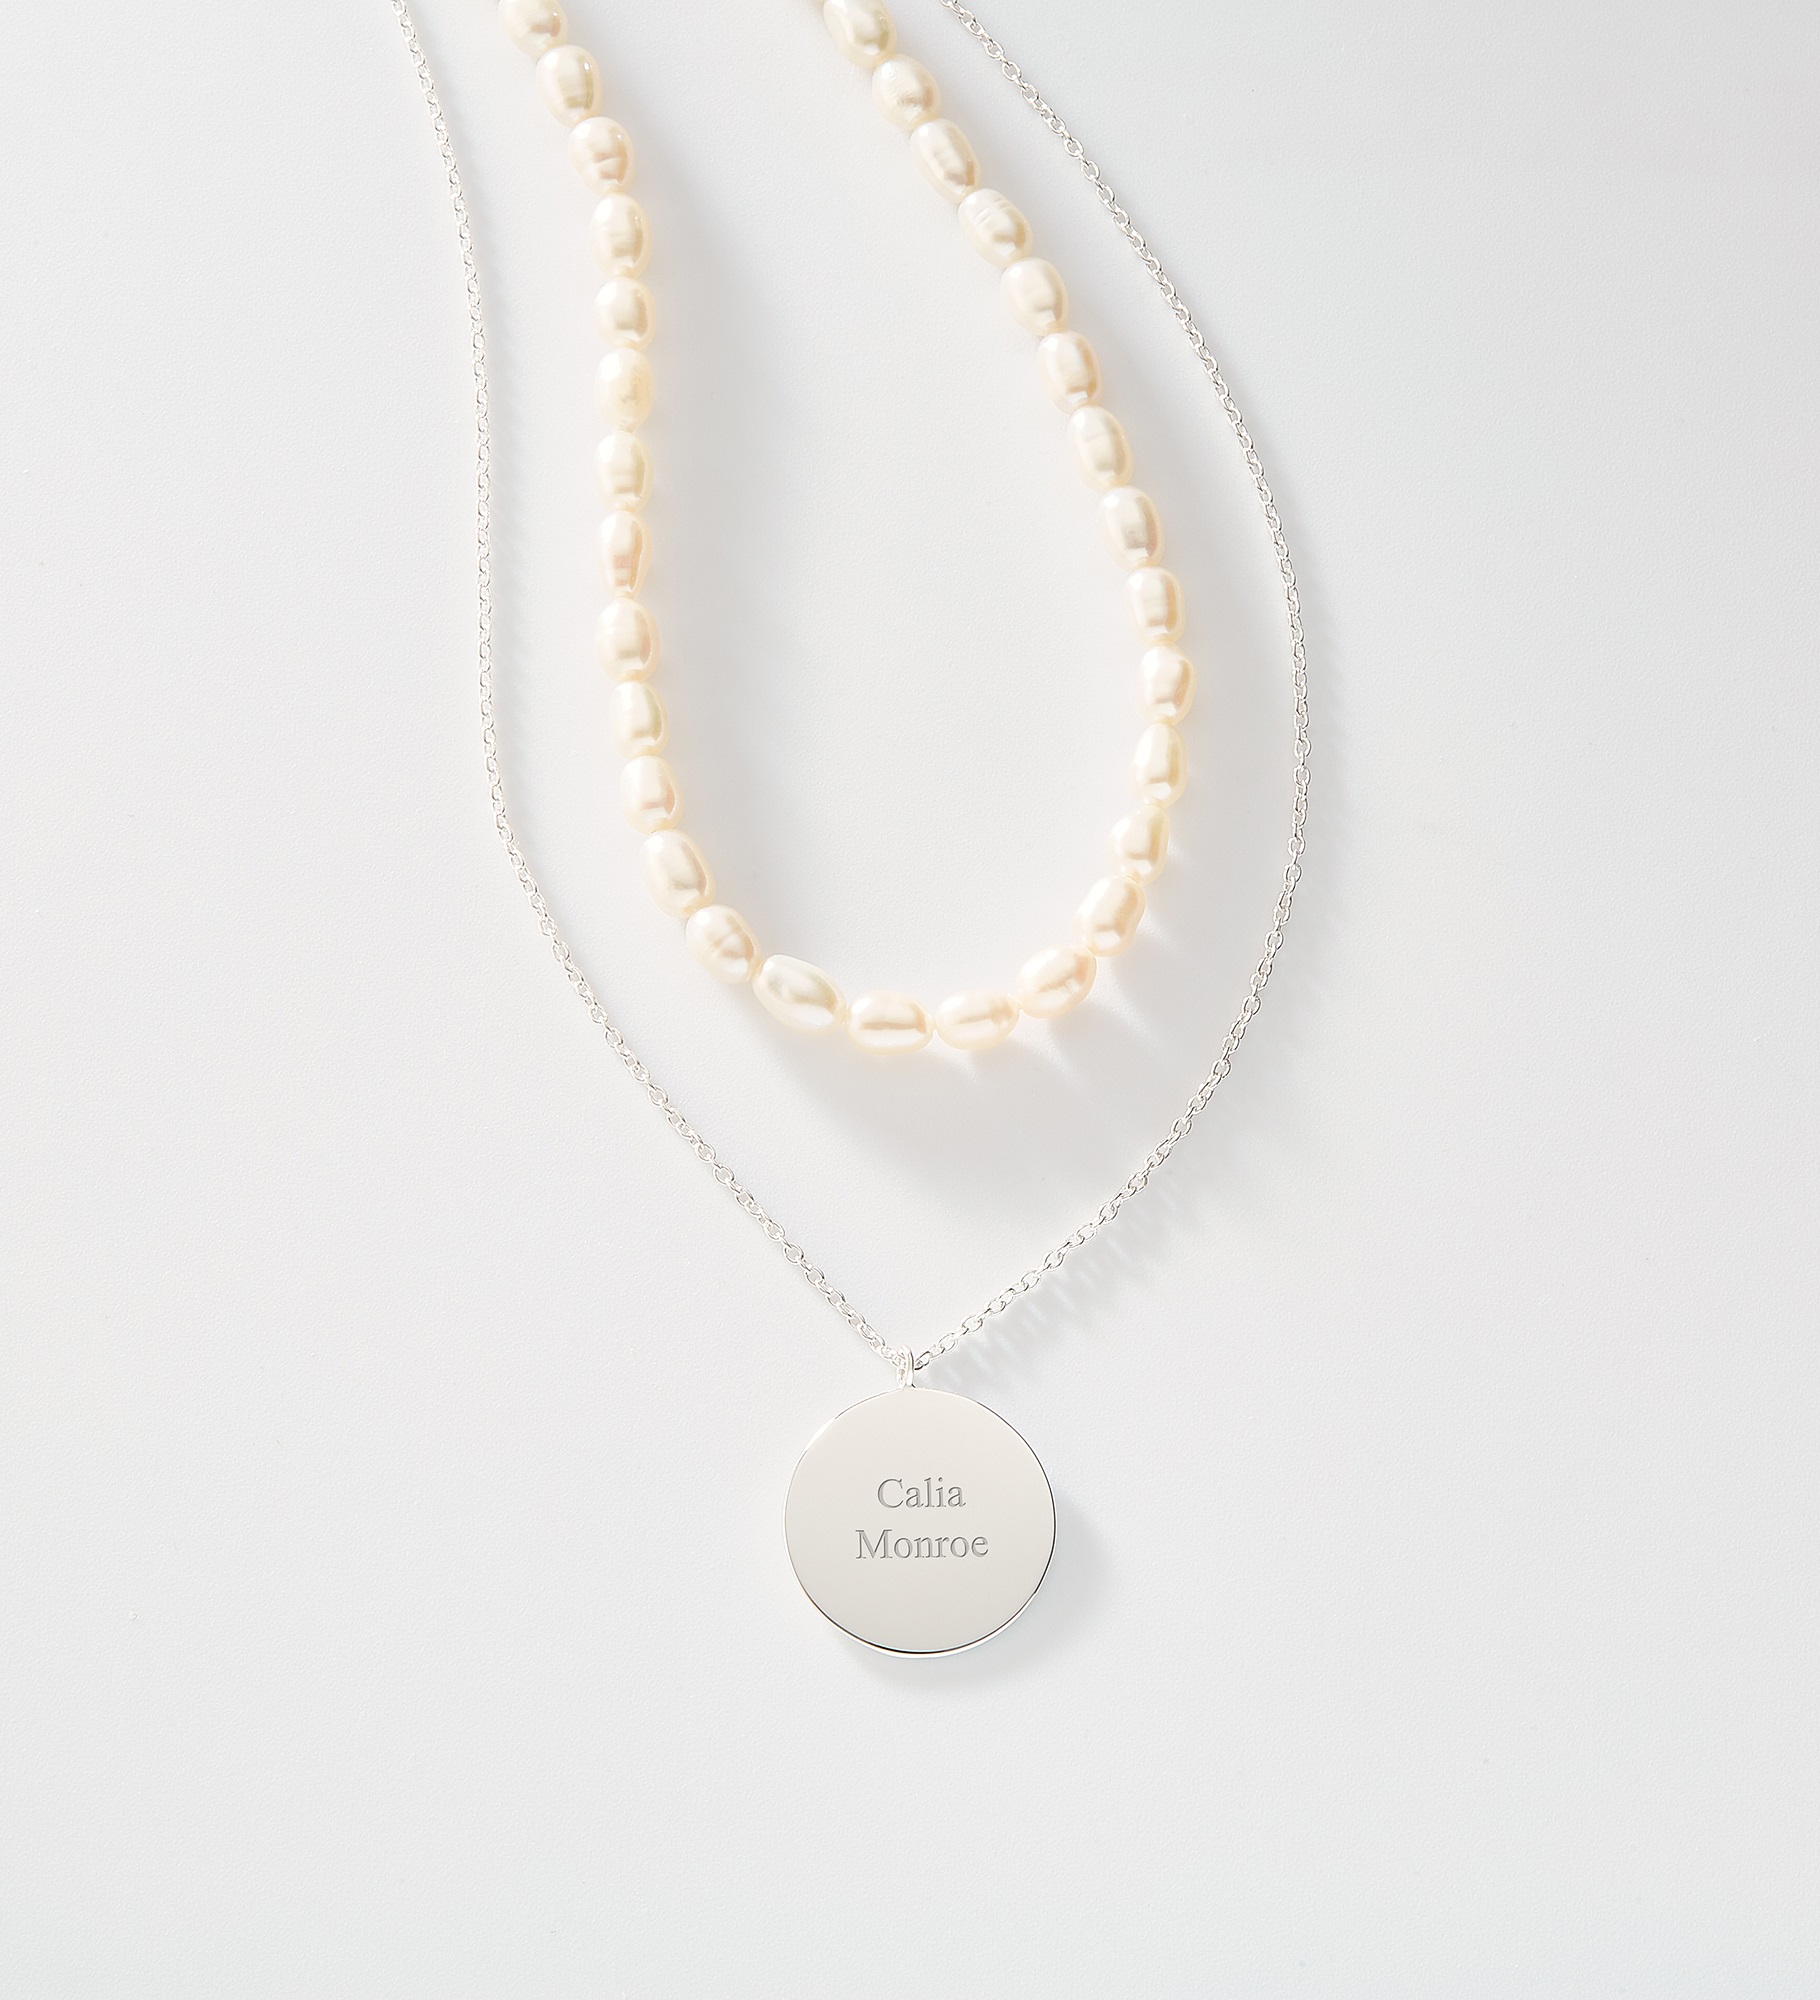  Engraved Pearl and Sterling Silver Pendant Necklace Set